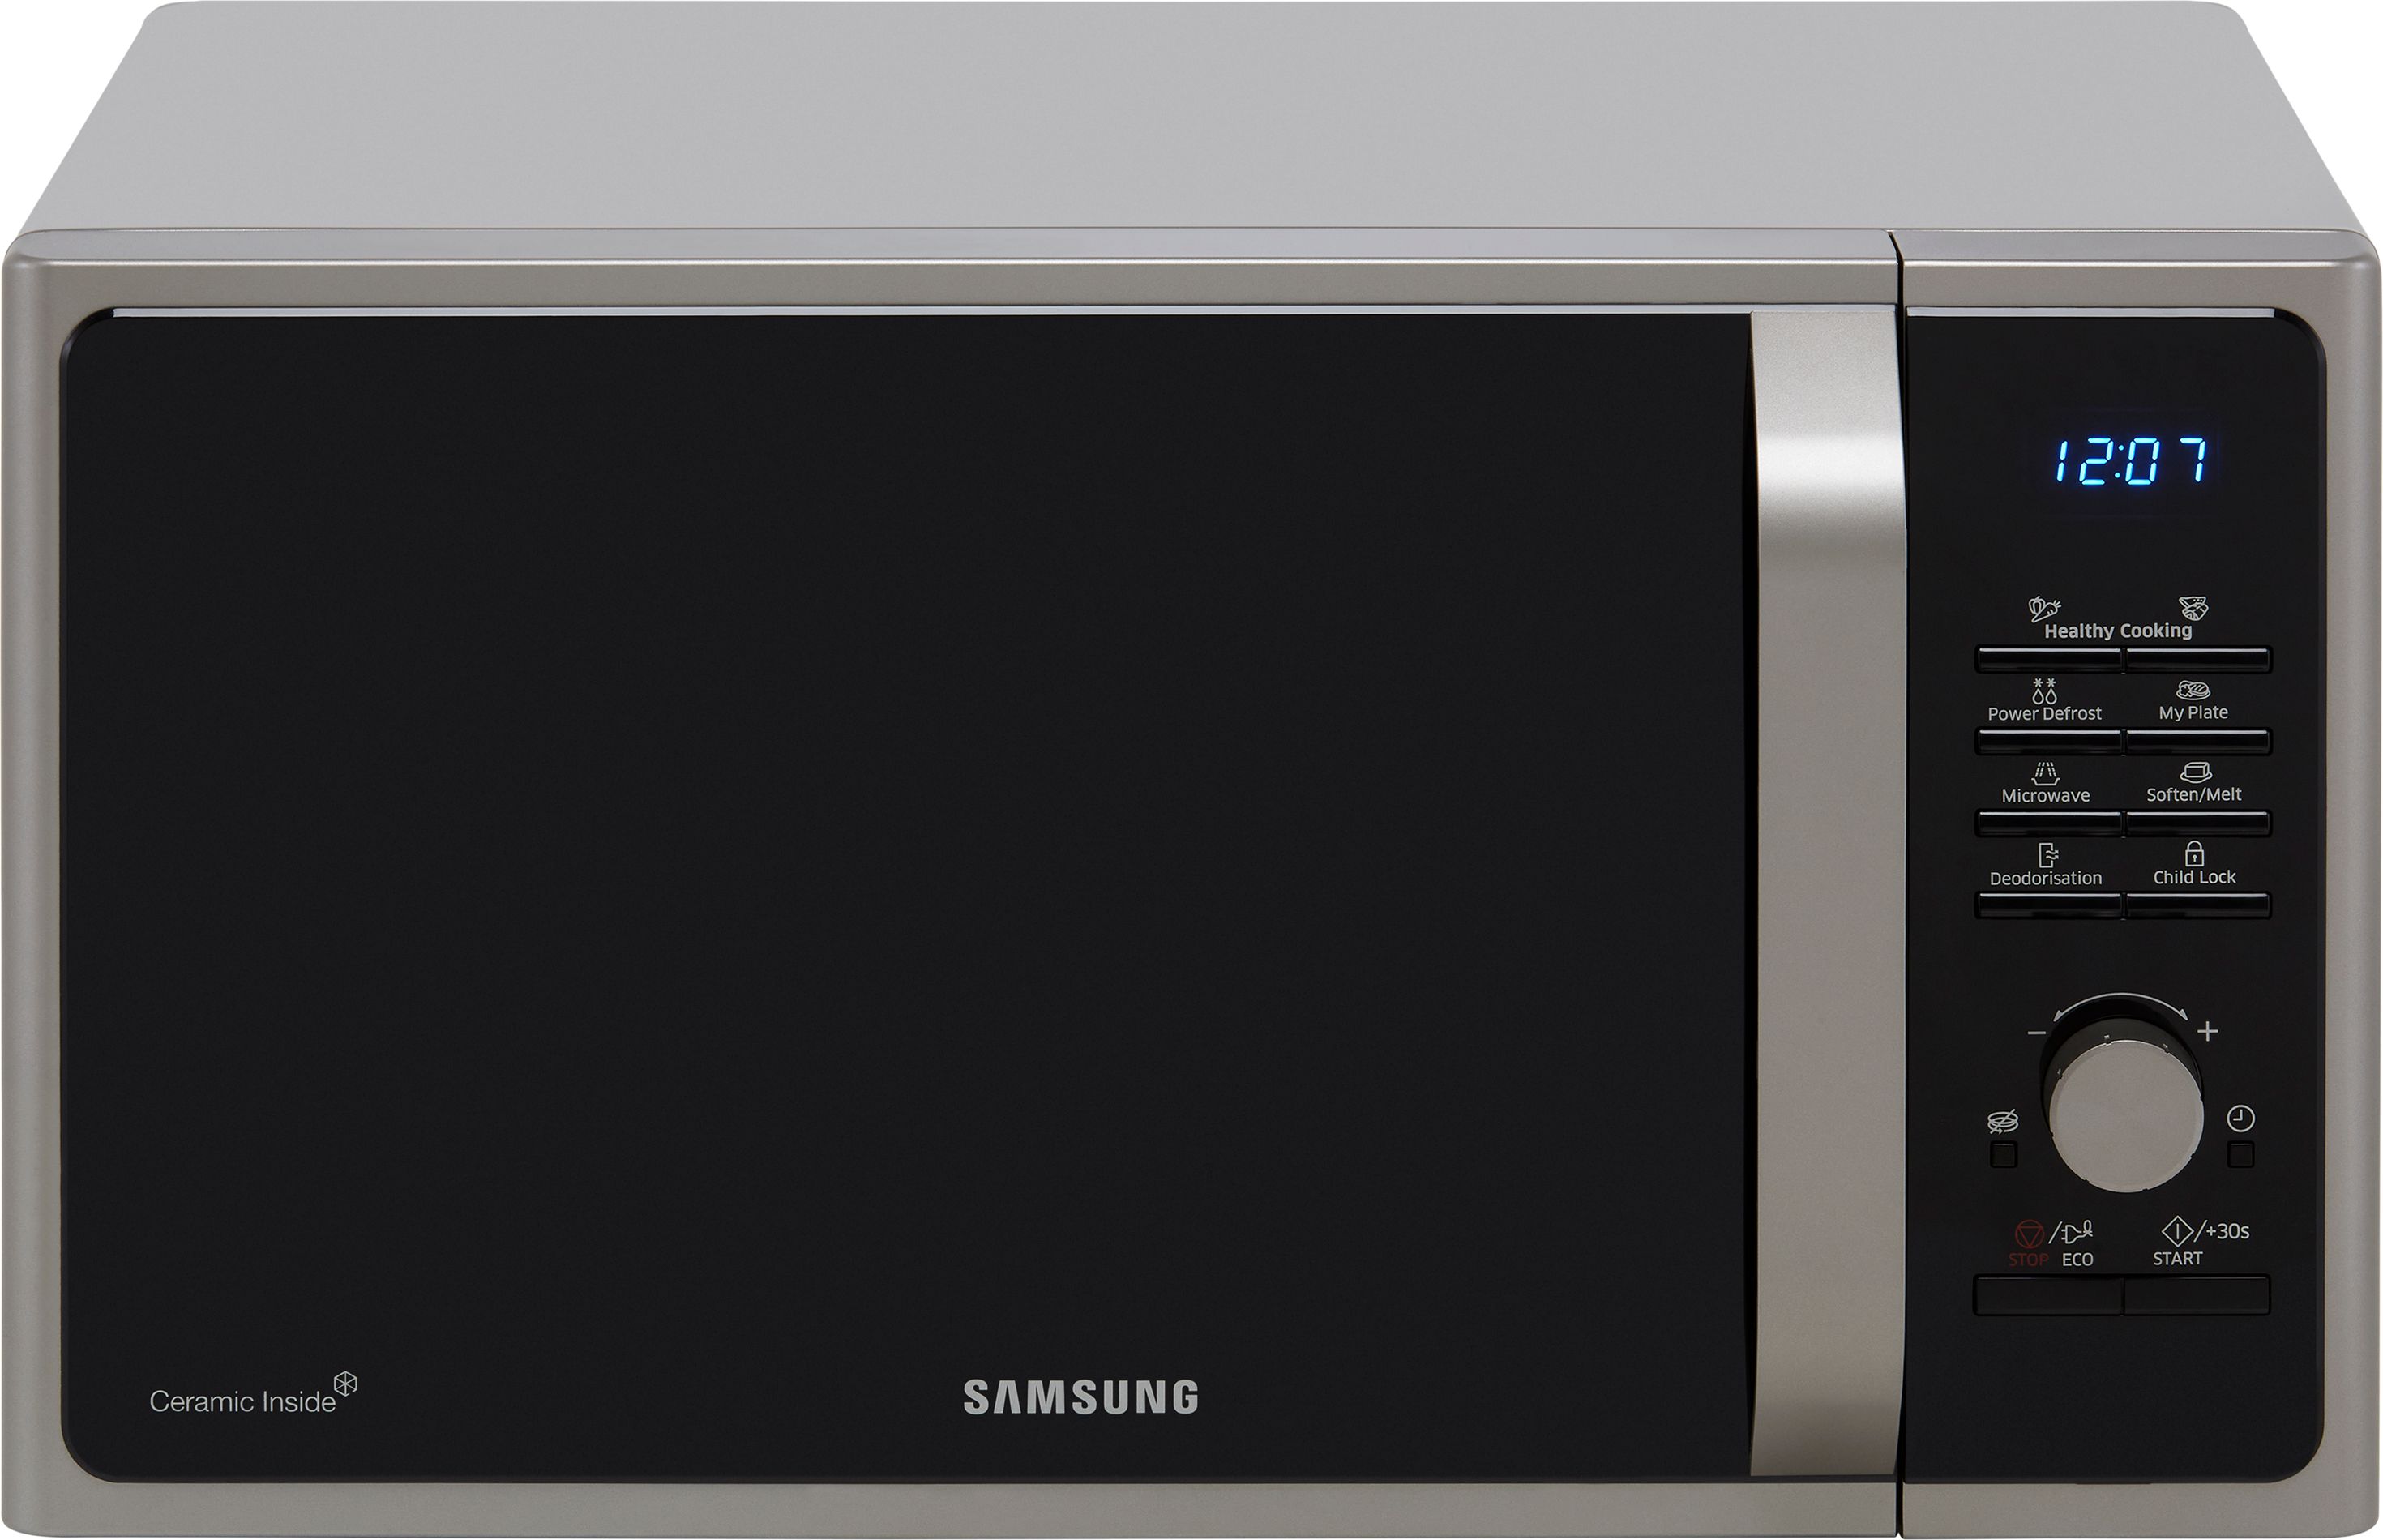 Samsung MS28F303TAS 30cm tall, 52cm wide, Freestanding Compact Microwave - Silver, Silver